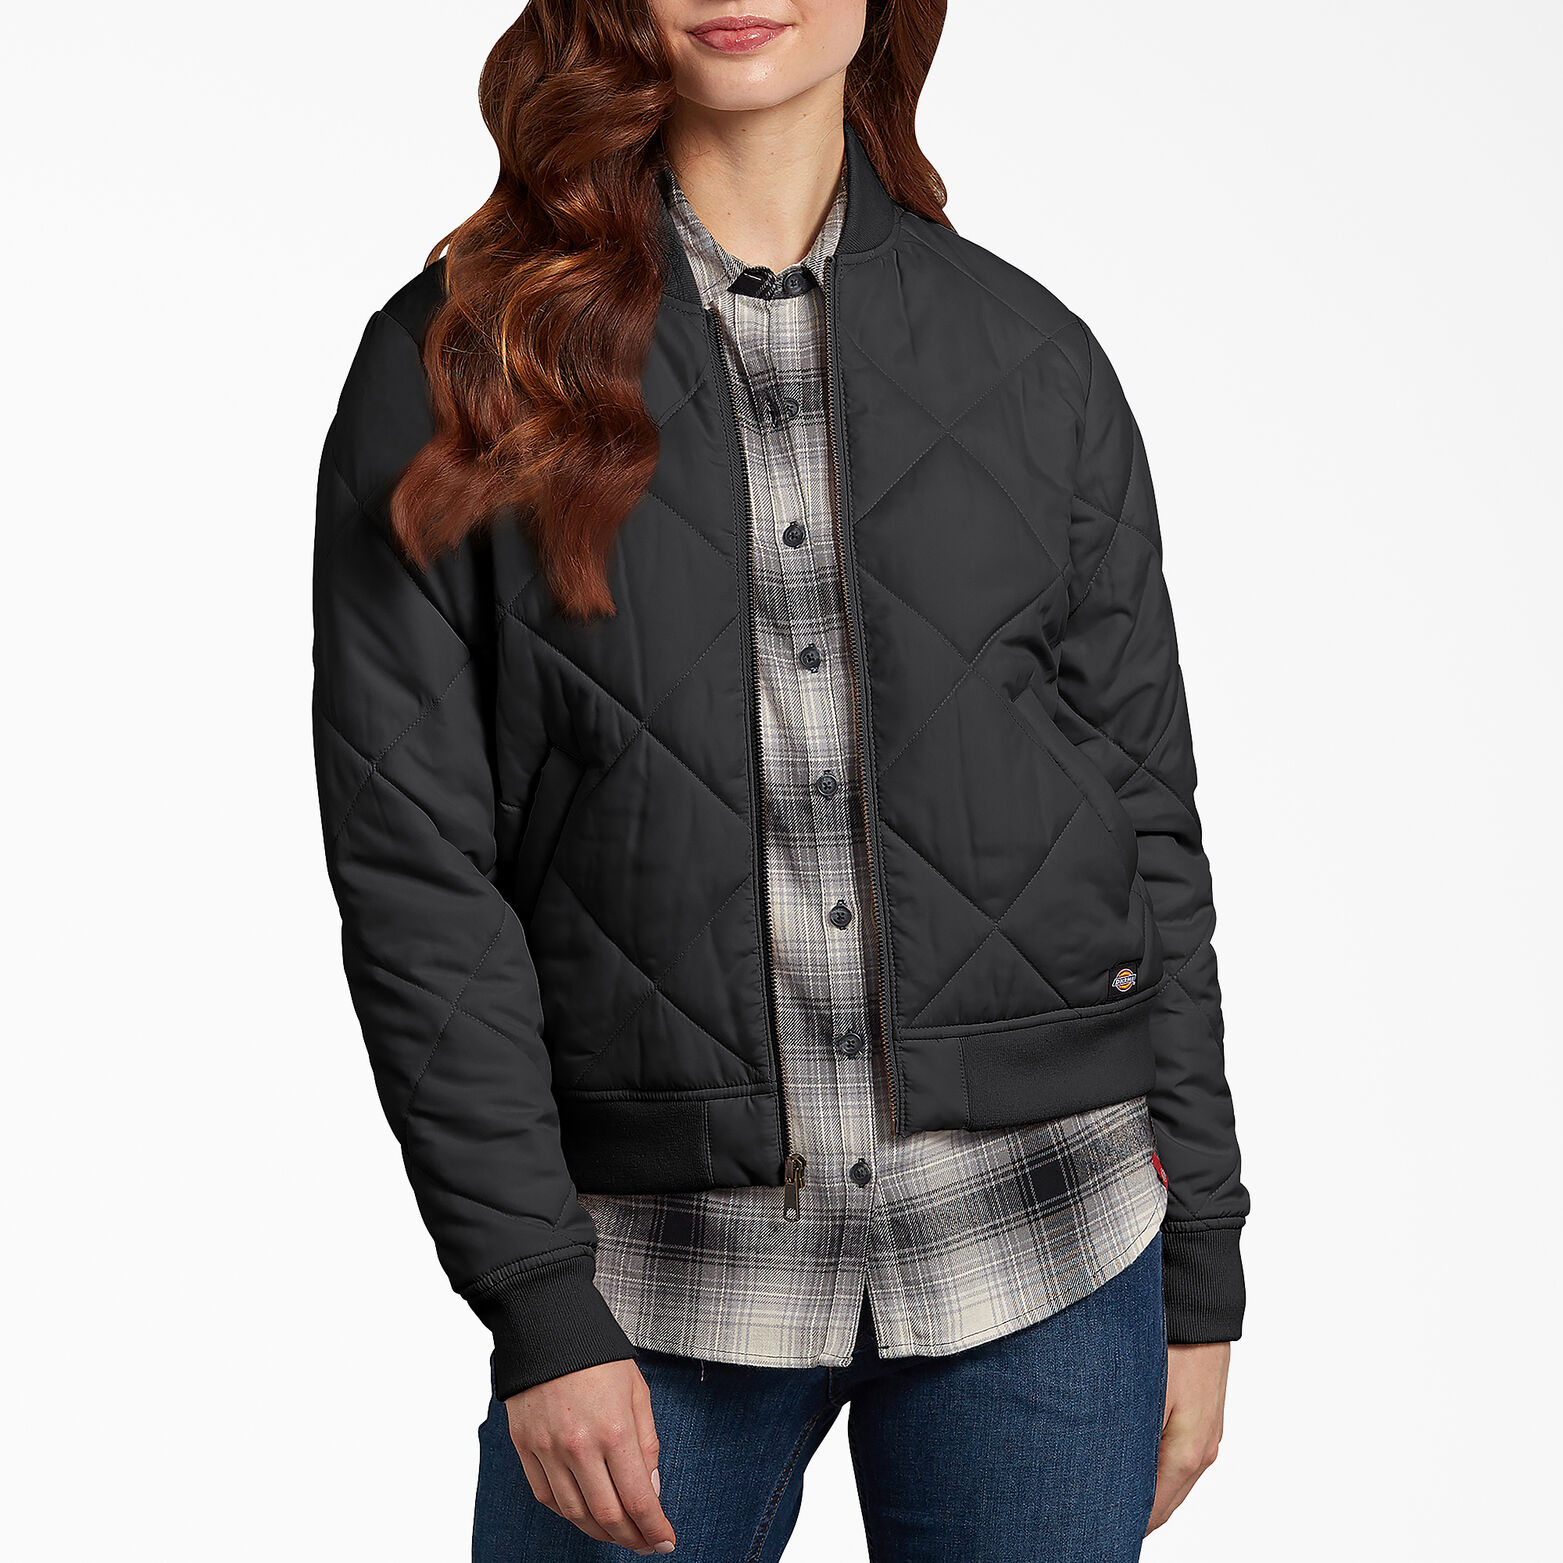 svag hardware Forurenet Women's Quilted Bomber Jacket | Outerwear | Dickies